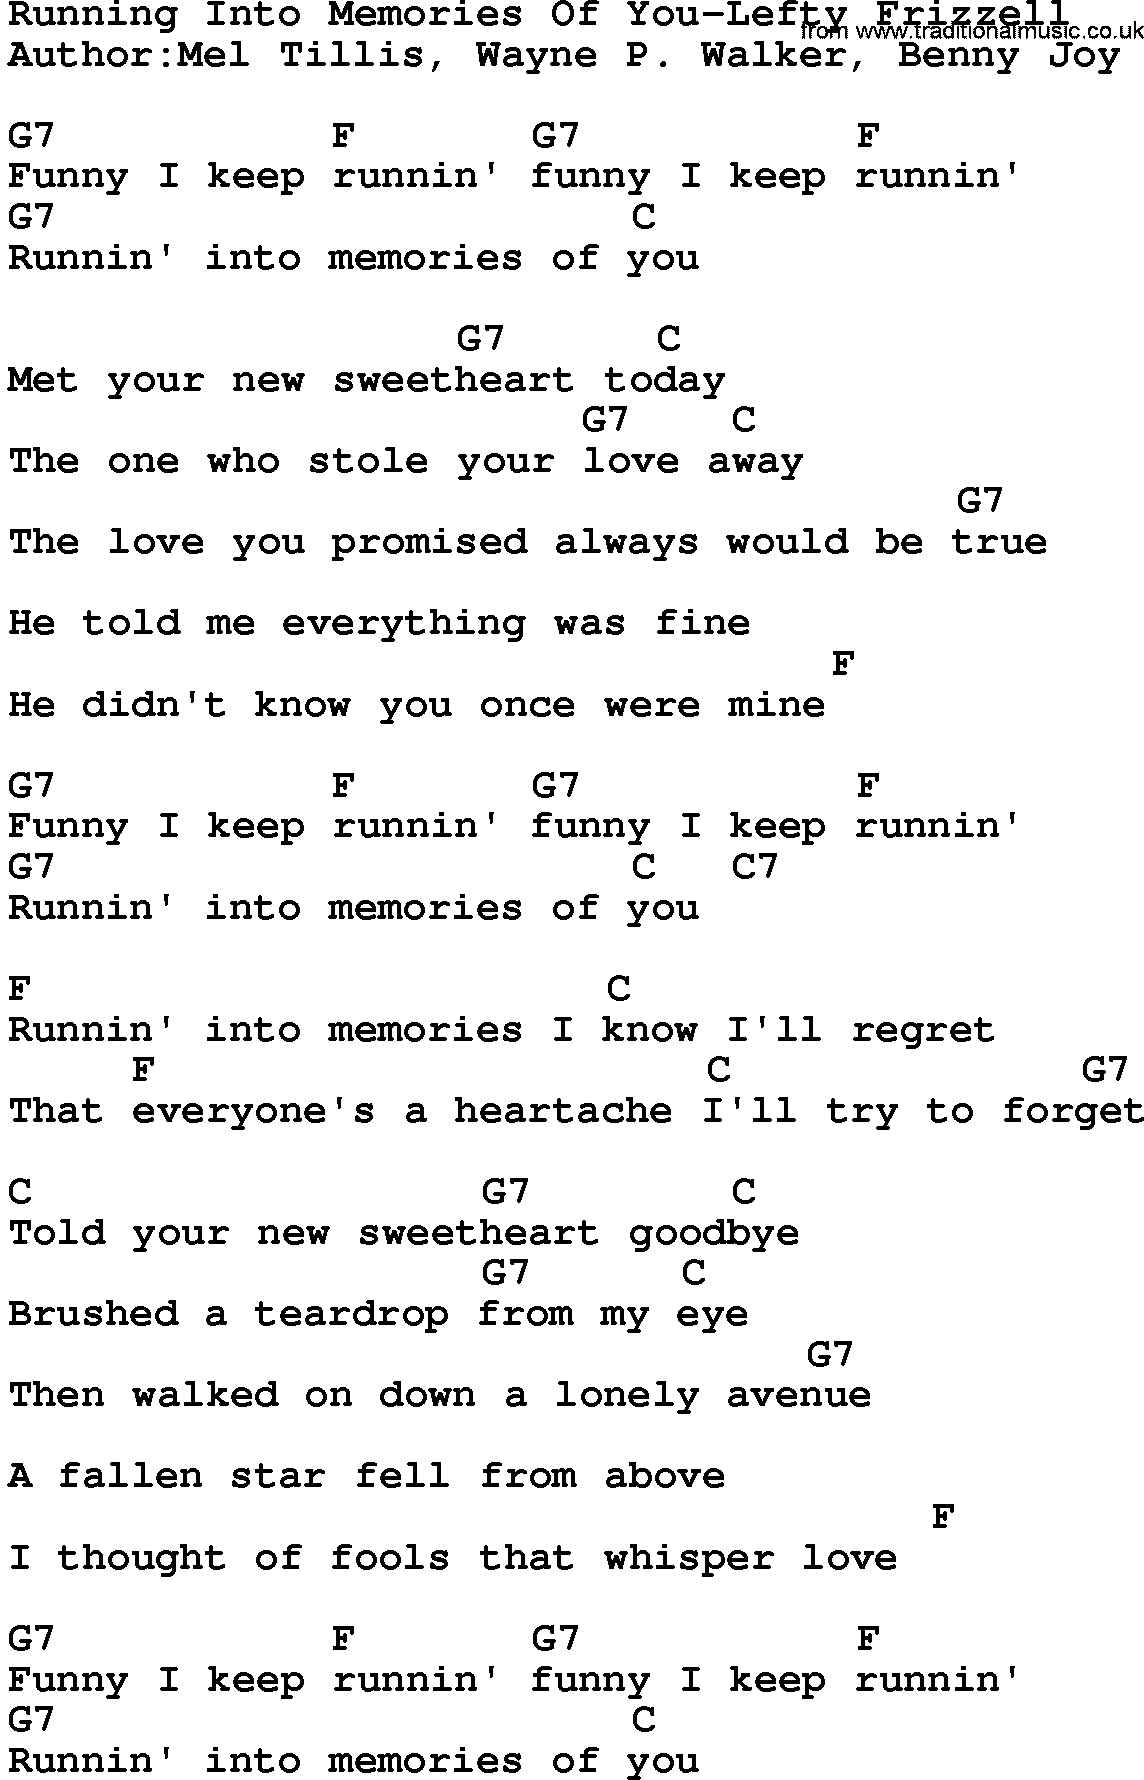 Country music song: Running Into Memories Of You-Lefty Frizzell lyrics and chords